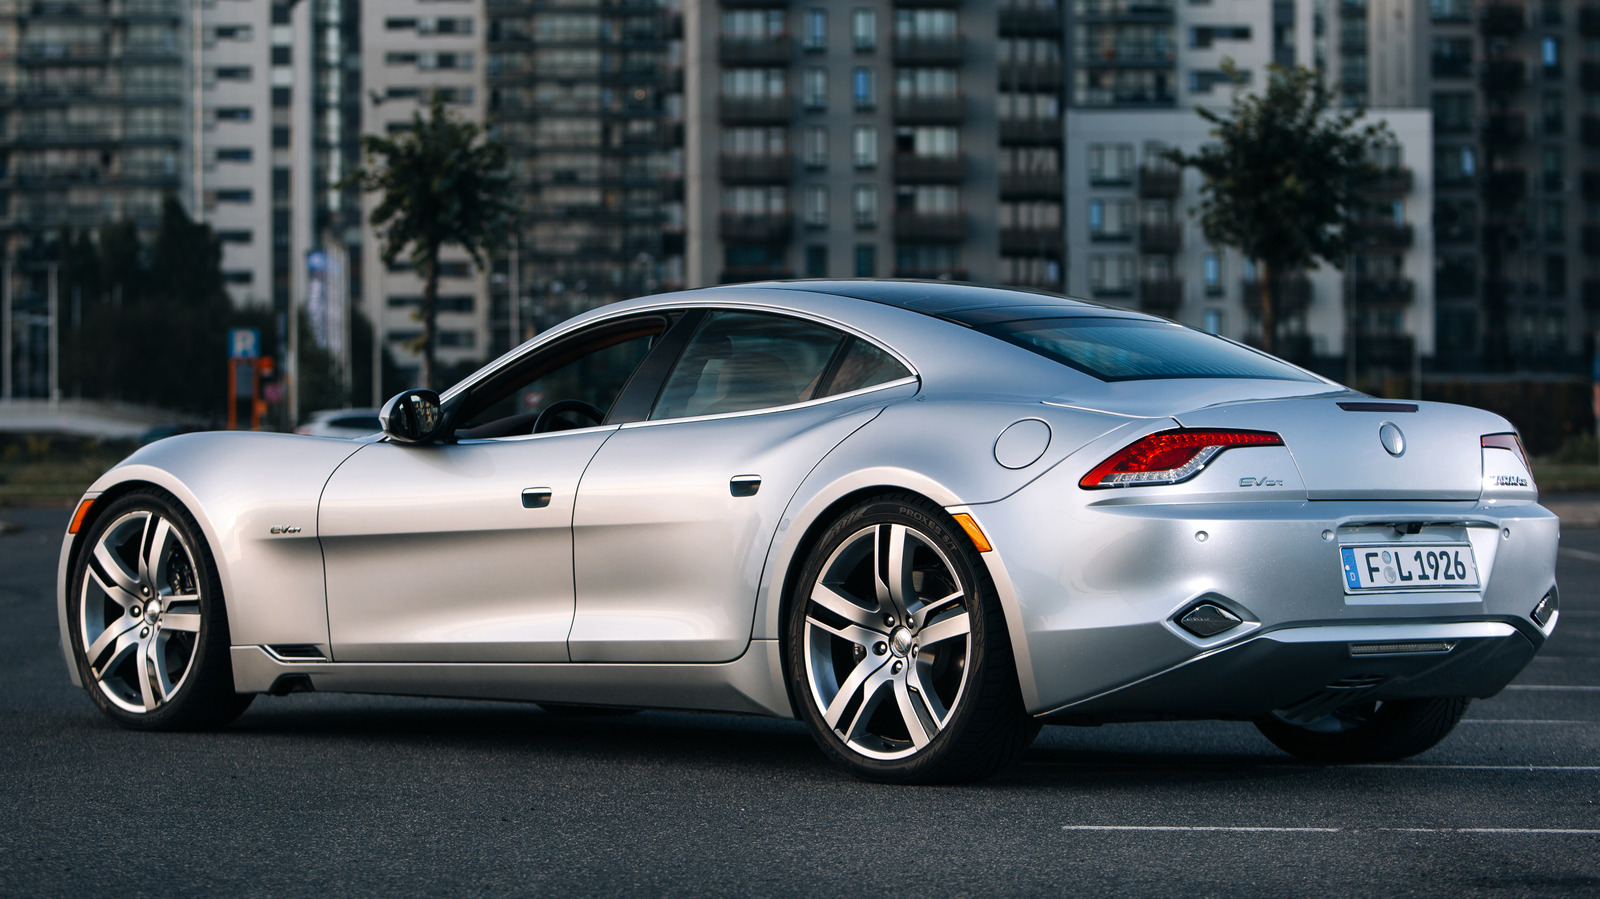 People Are Still Putting Eyelashes on Cars, Fisker Karma Falls